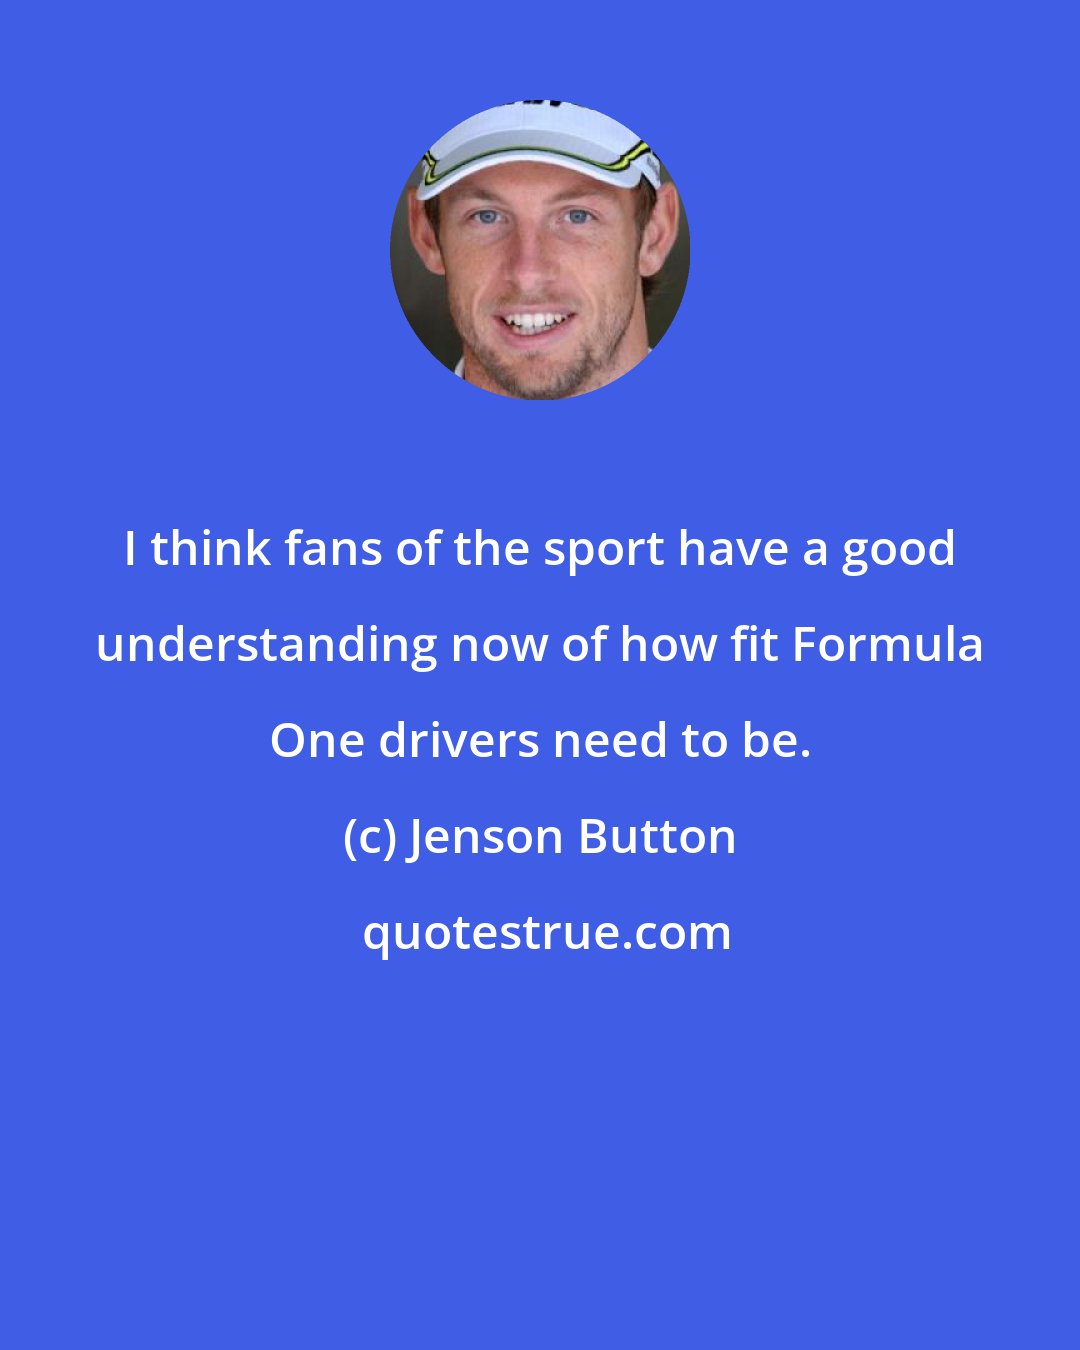 Jenson Button: I think fans of the sport have a good understanding now of how fit Formula One drivers need to be.